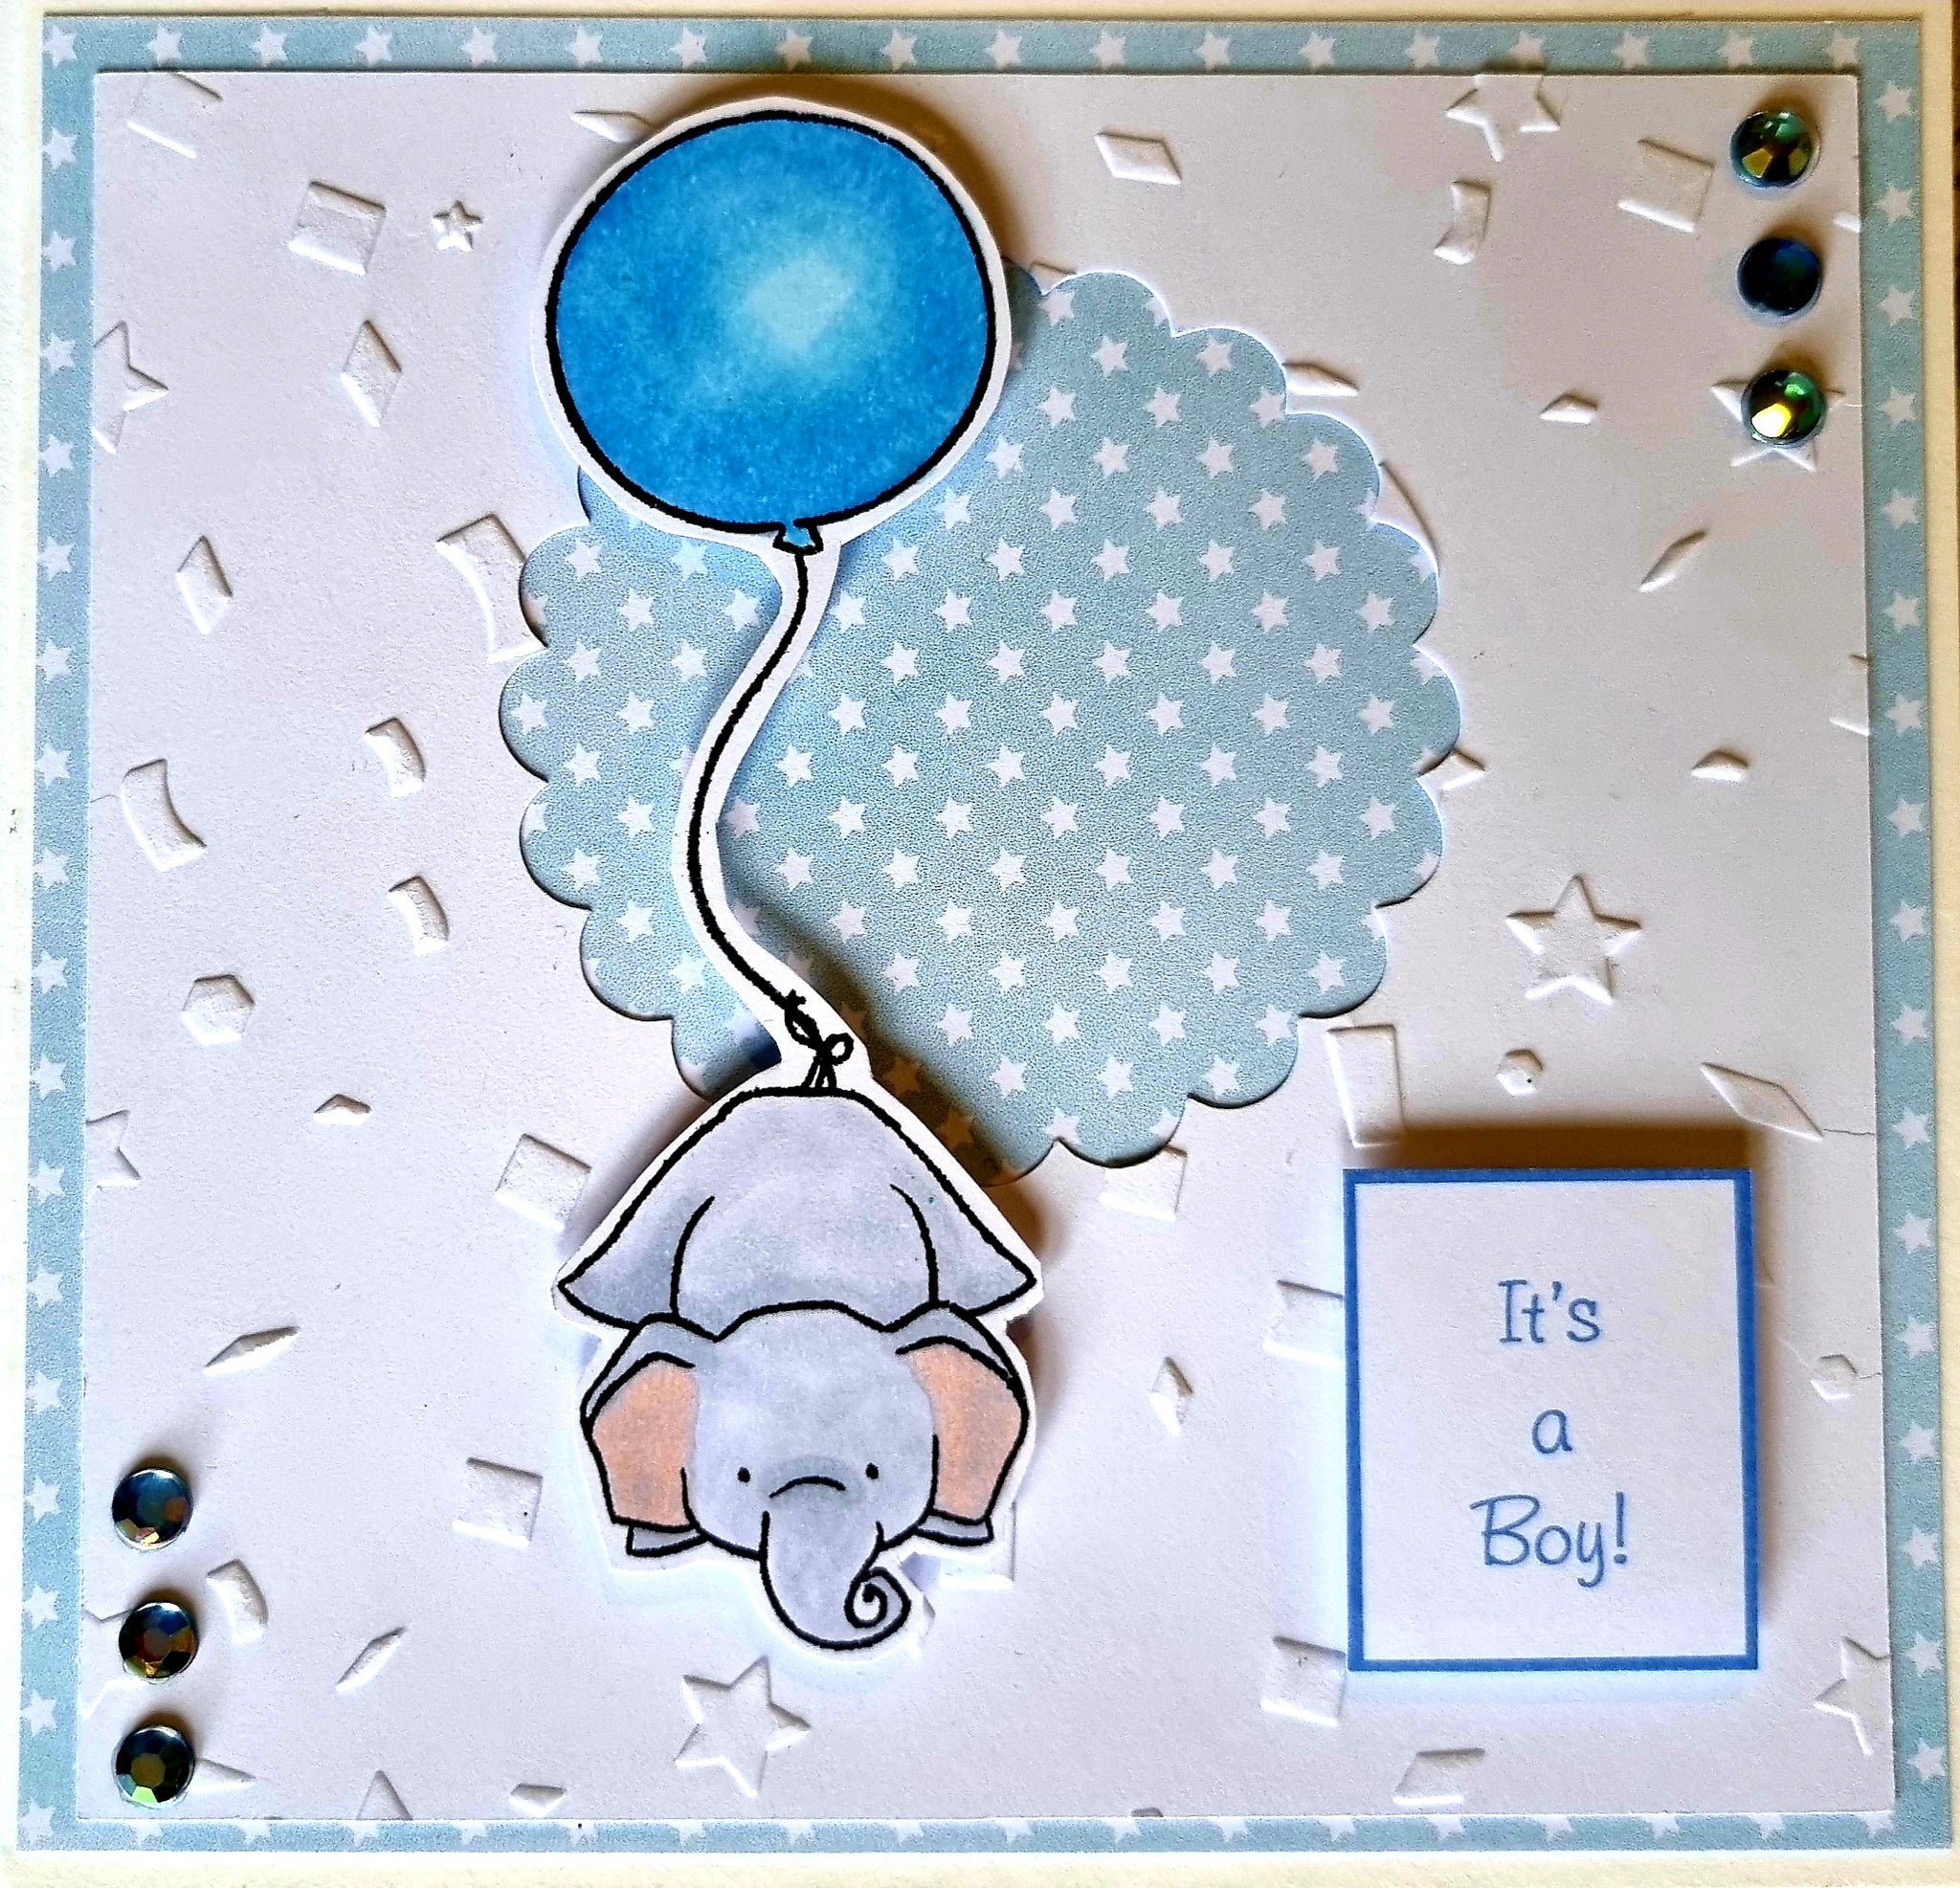 Gift Vouchers - Baby Shower present - New baby gift - Personalised